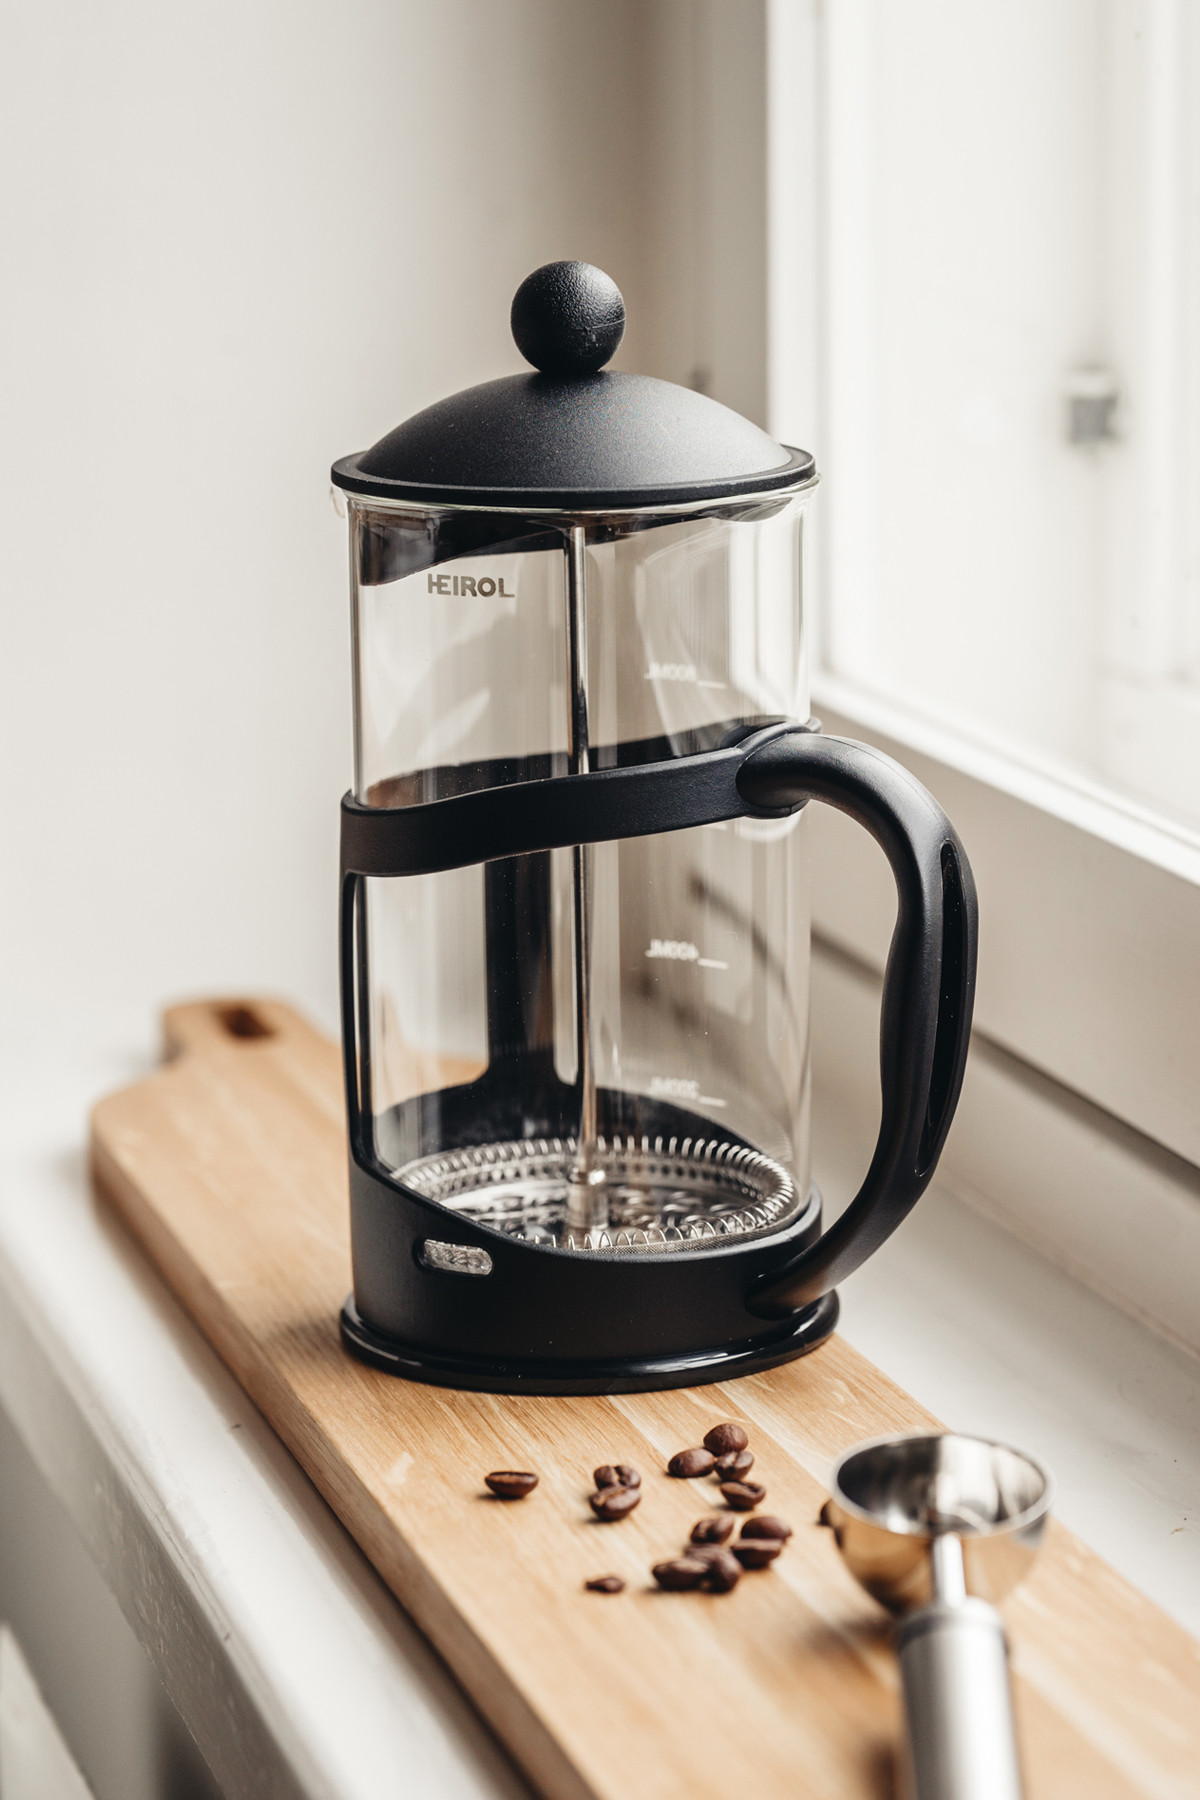 How To Make Coffee: The Perfect French Press Technique - Turntable Kitchen